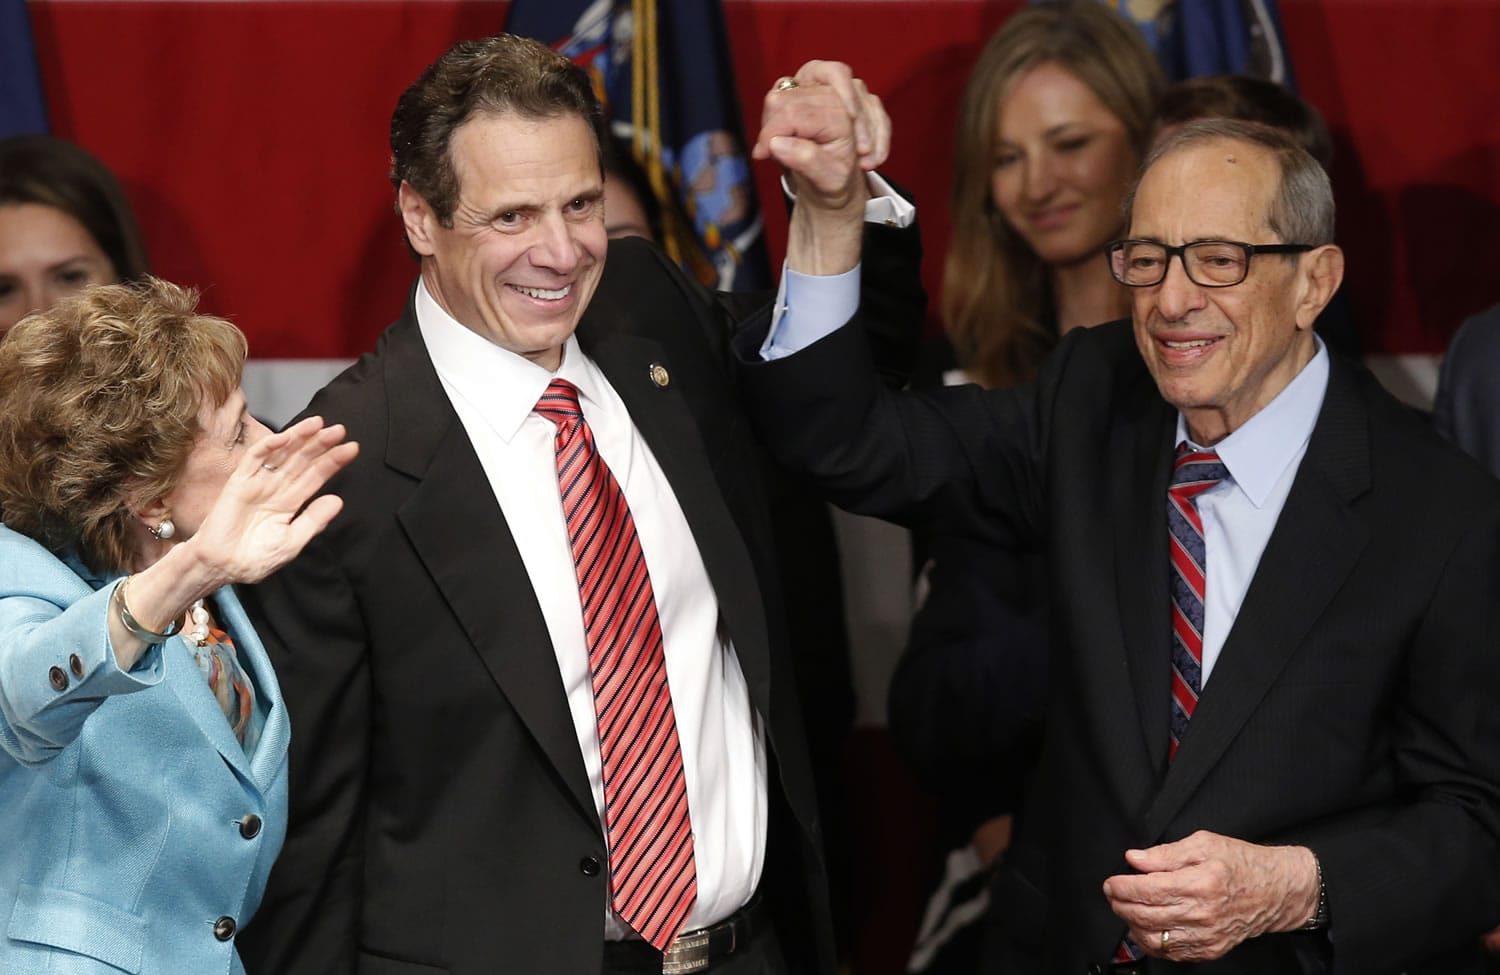 Democratic New York Gov. Andrew Cuomo, second from left, celebrates Nov. 4 with his father, former New York Gov. Mario Cuomo, and his mother, Matilda, left, after defeating Republican challenger Rob Astorino, at Democratic election headquarters in New York. Andrew Cuomo is the first New York Democratic governor since his father to win re-election.